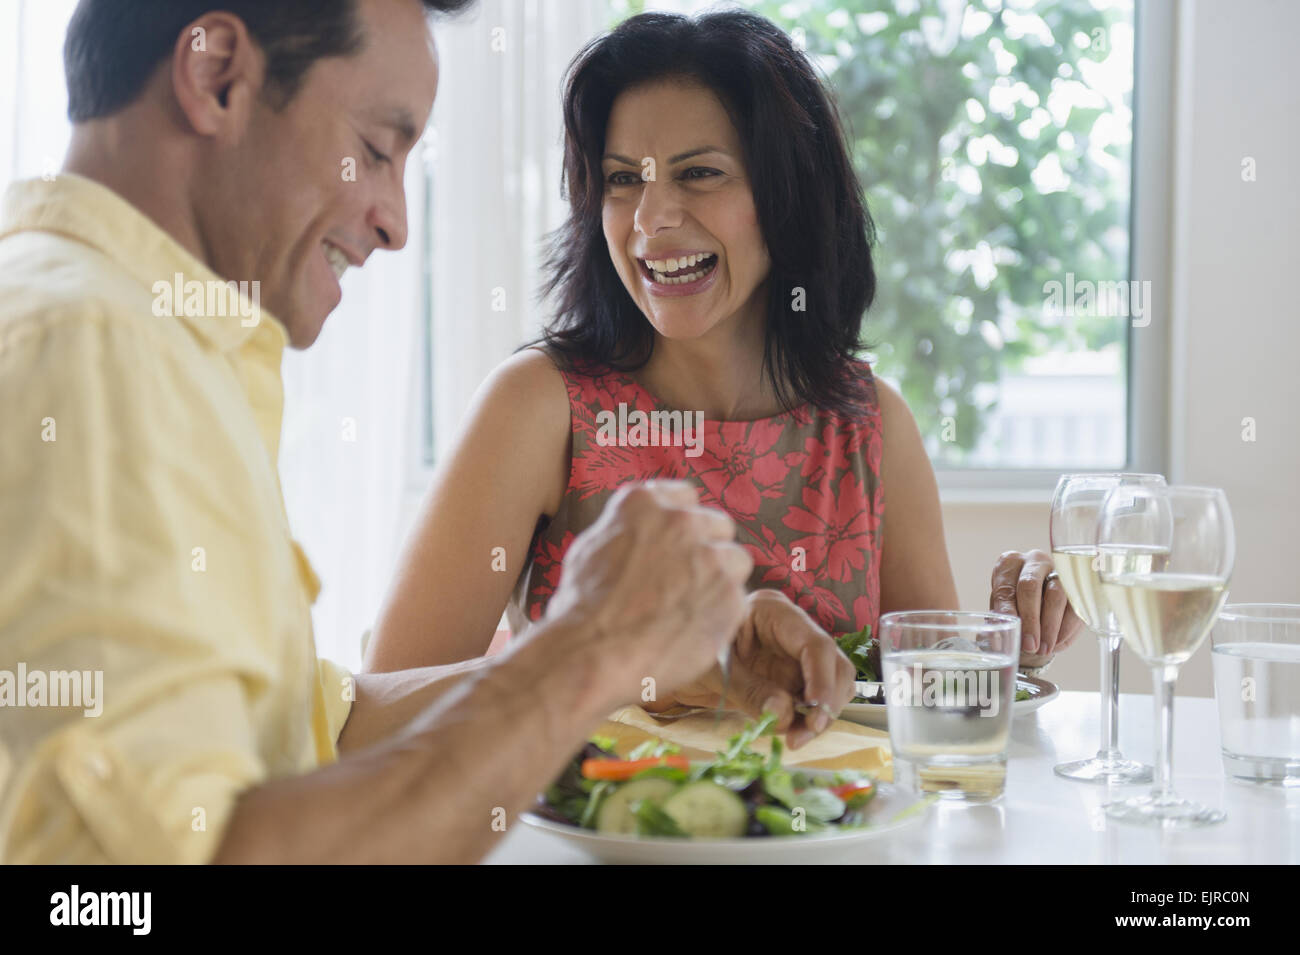 Couple eating lunch in restaurant Stock Photo